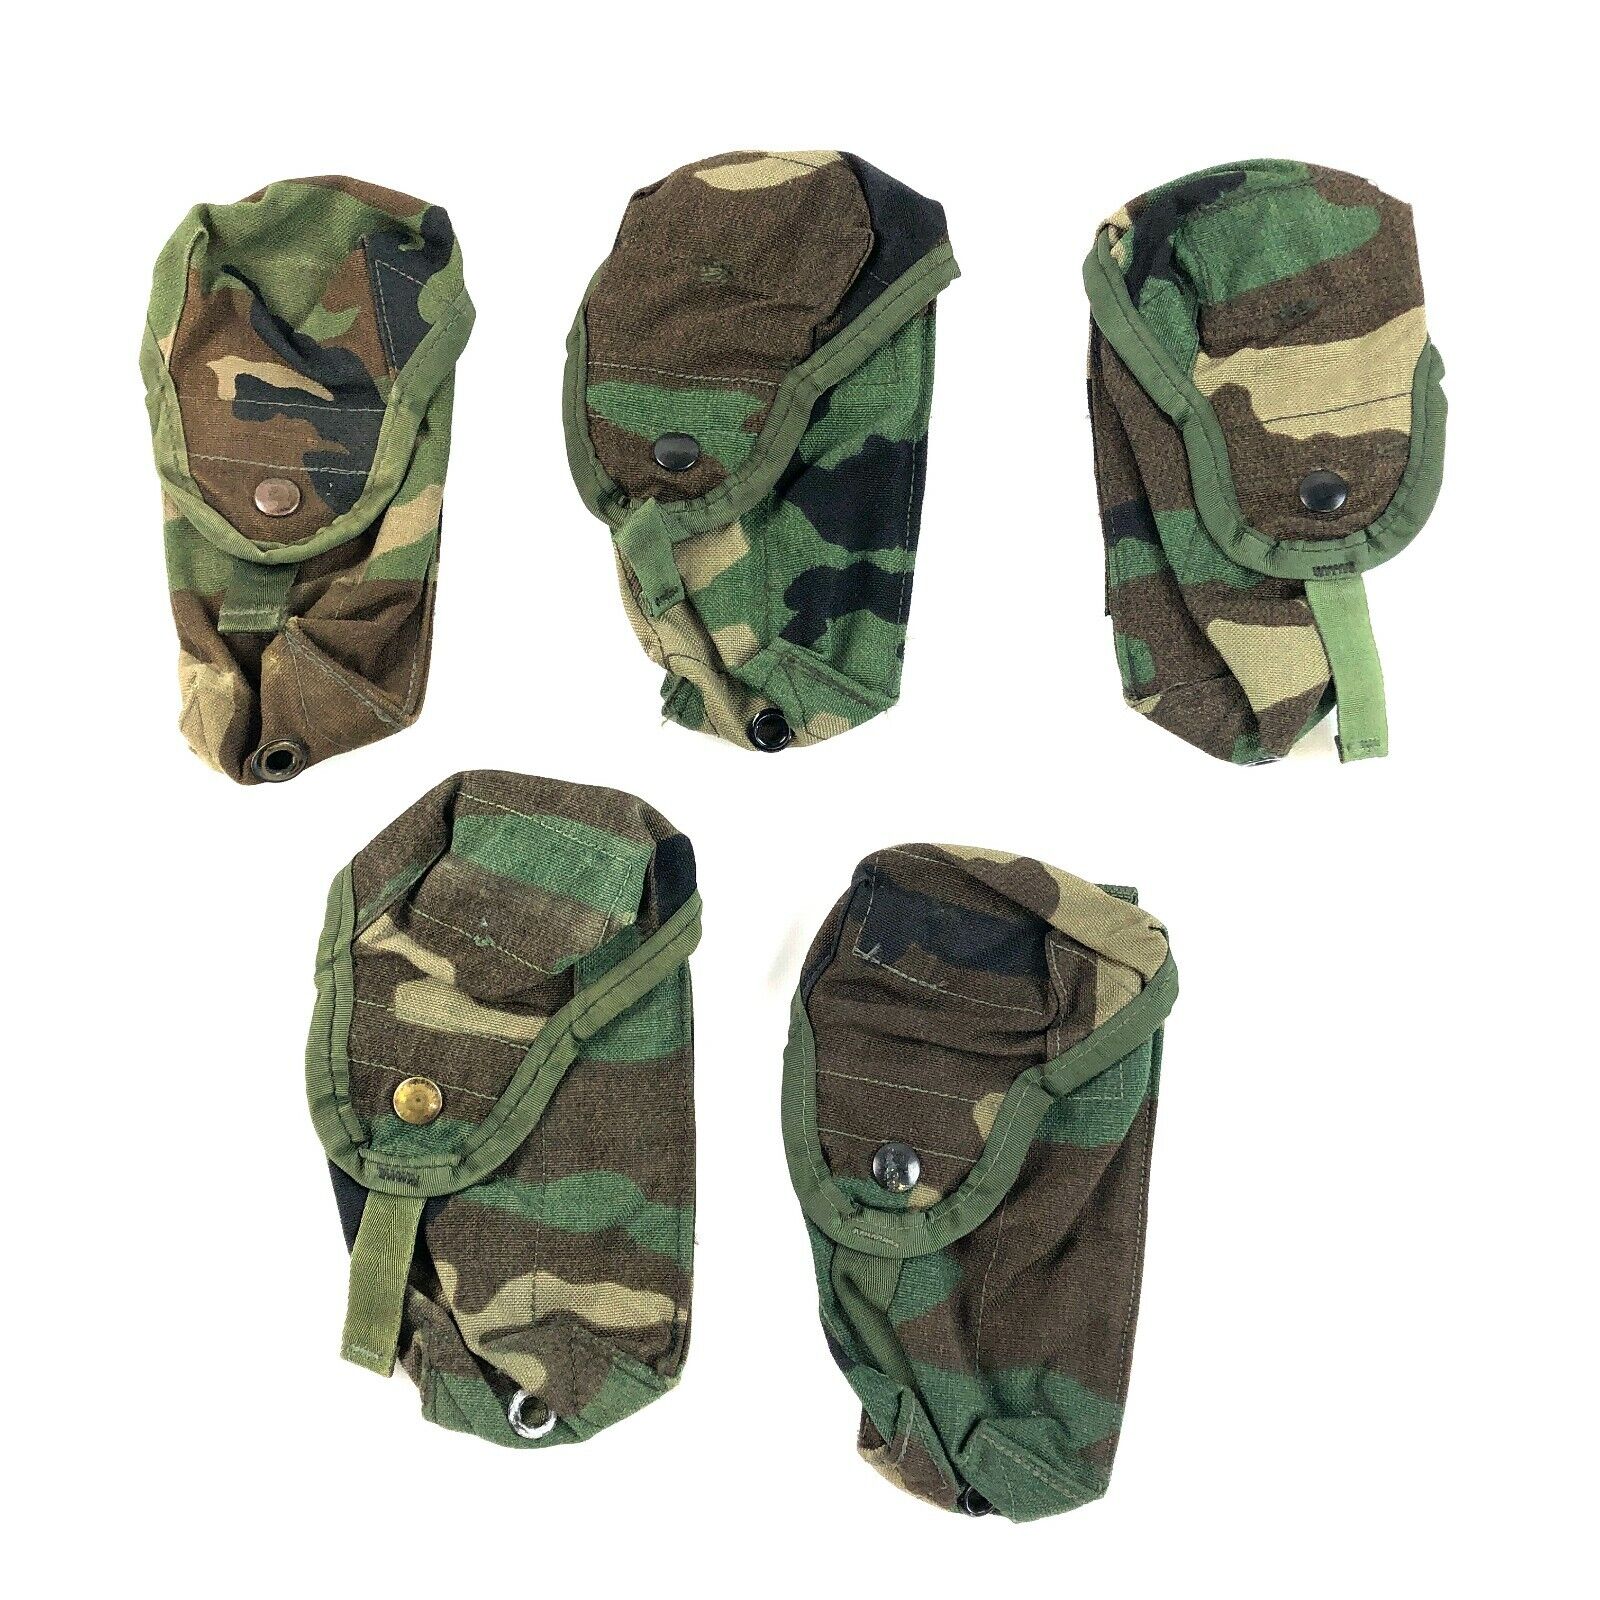 5 Woodland Double Magazine Pouches BDU Military Pouch MOLLE 2 Mag Camo 